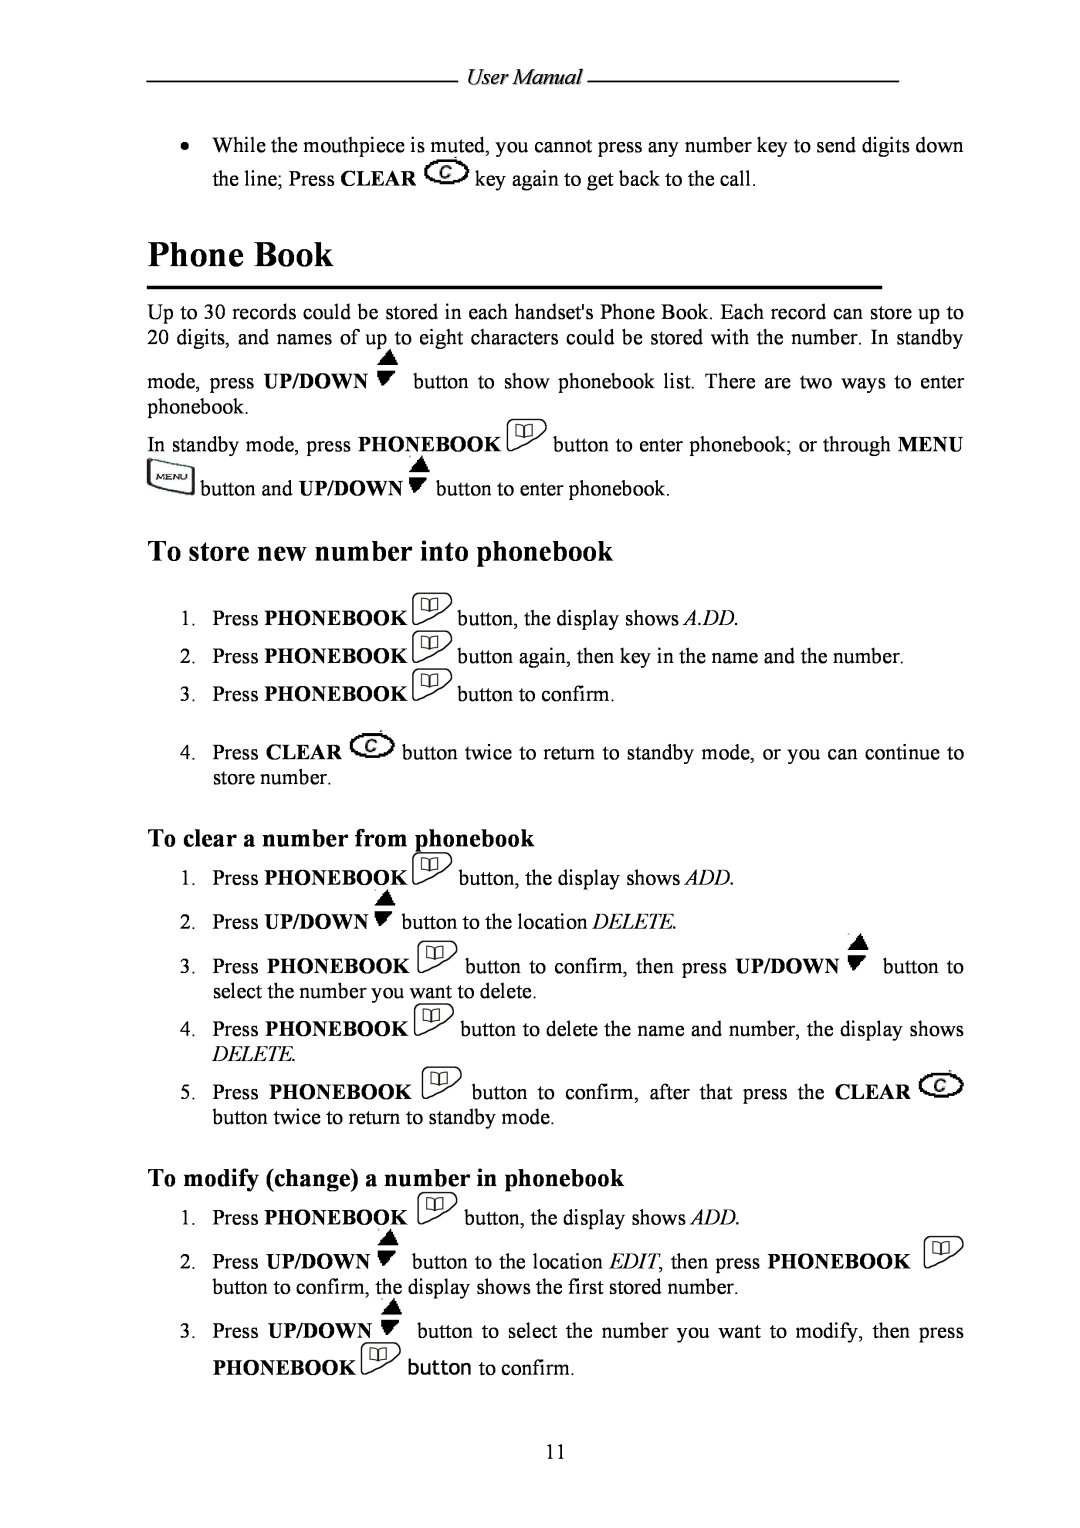 Shiro SD8501 user manual Phone Book, To store new number into phonebook, To clear a number from phonebook 